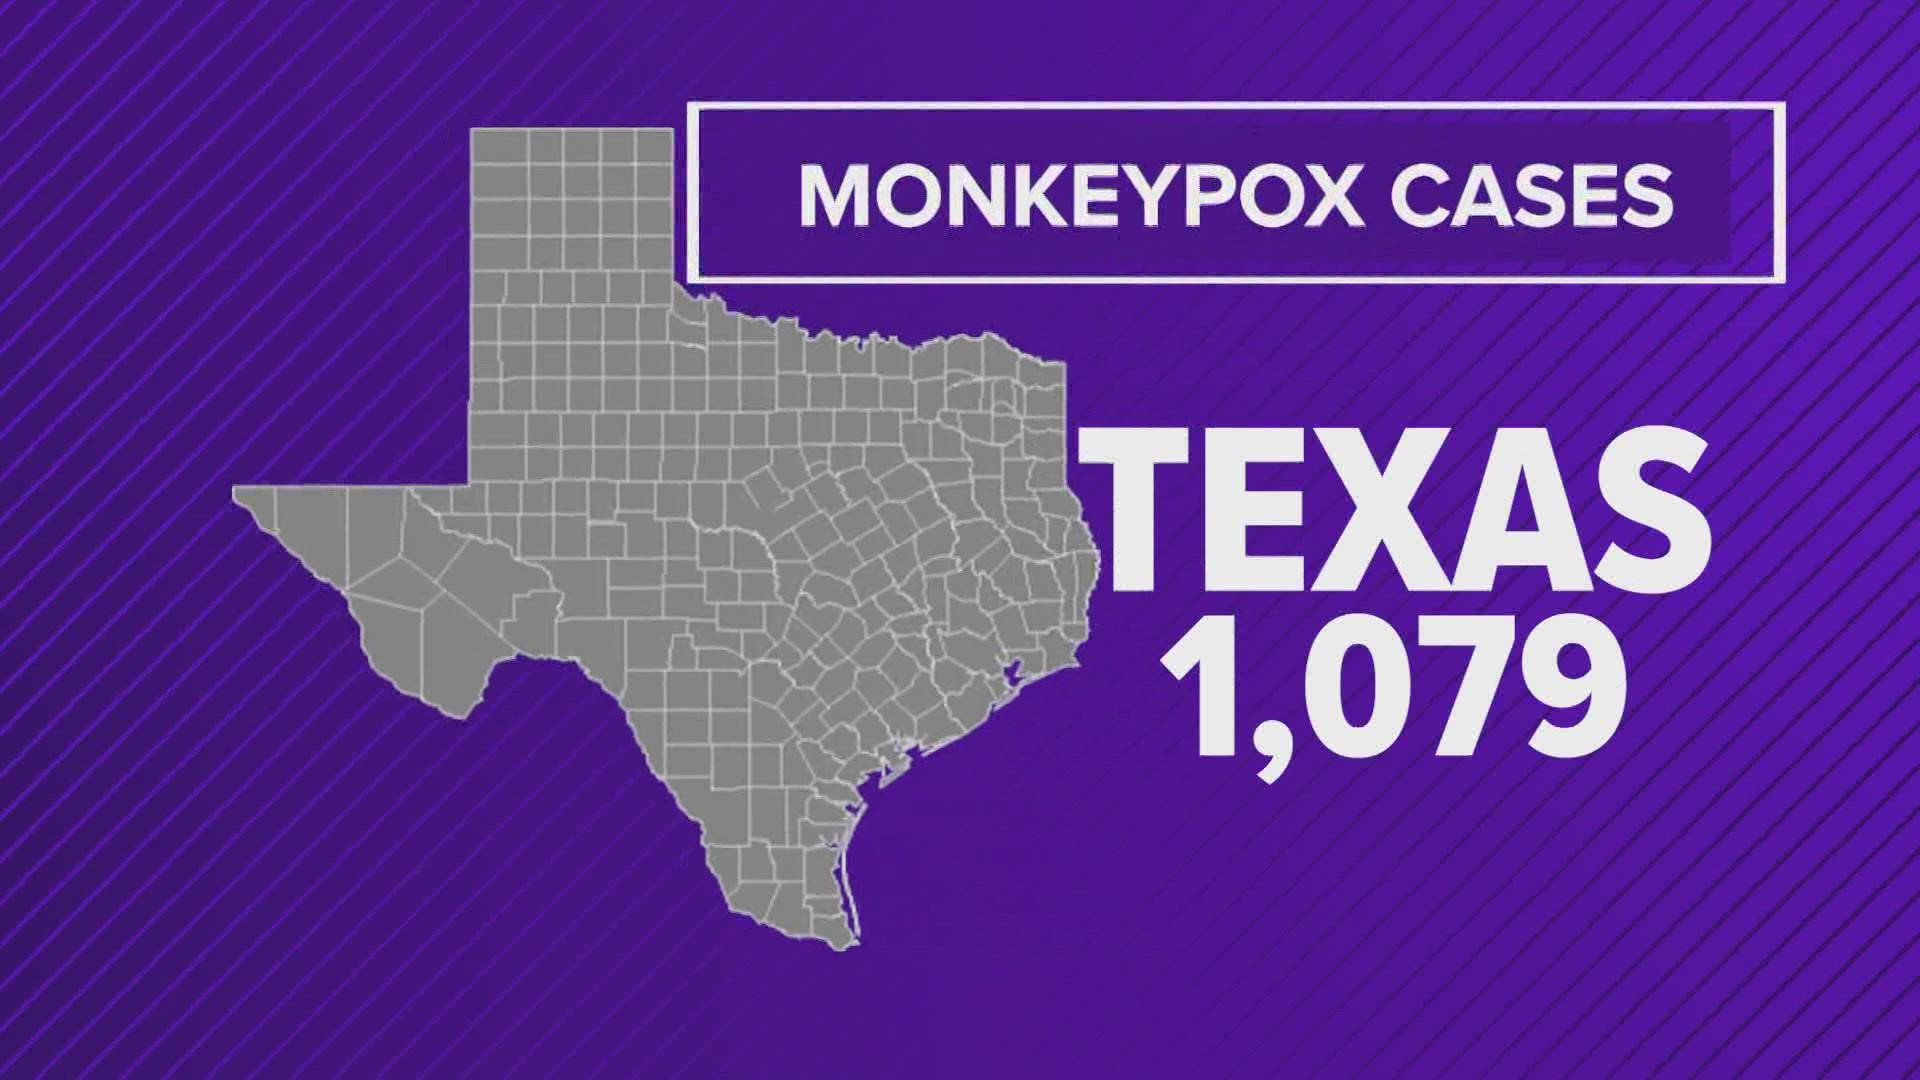 Harris County is reporting 394 confirmed monkeypox cases. The City of Houston reports 334.